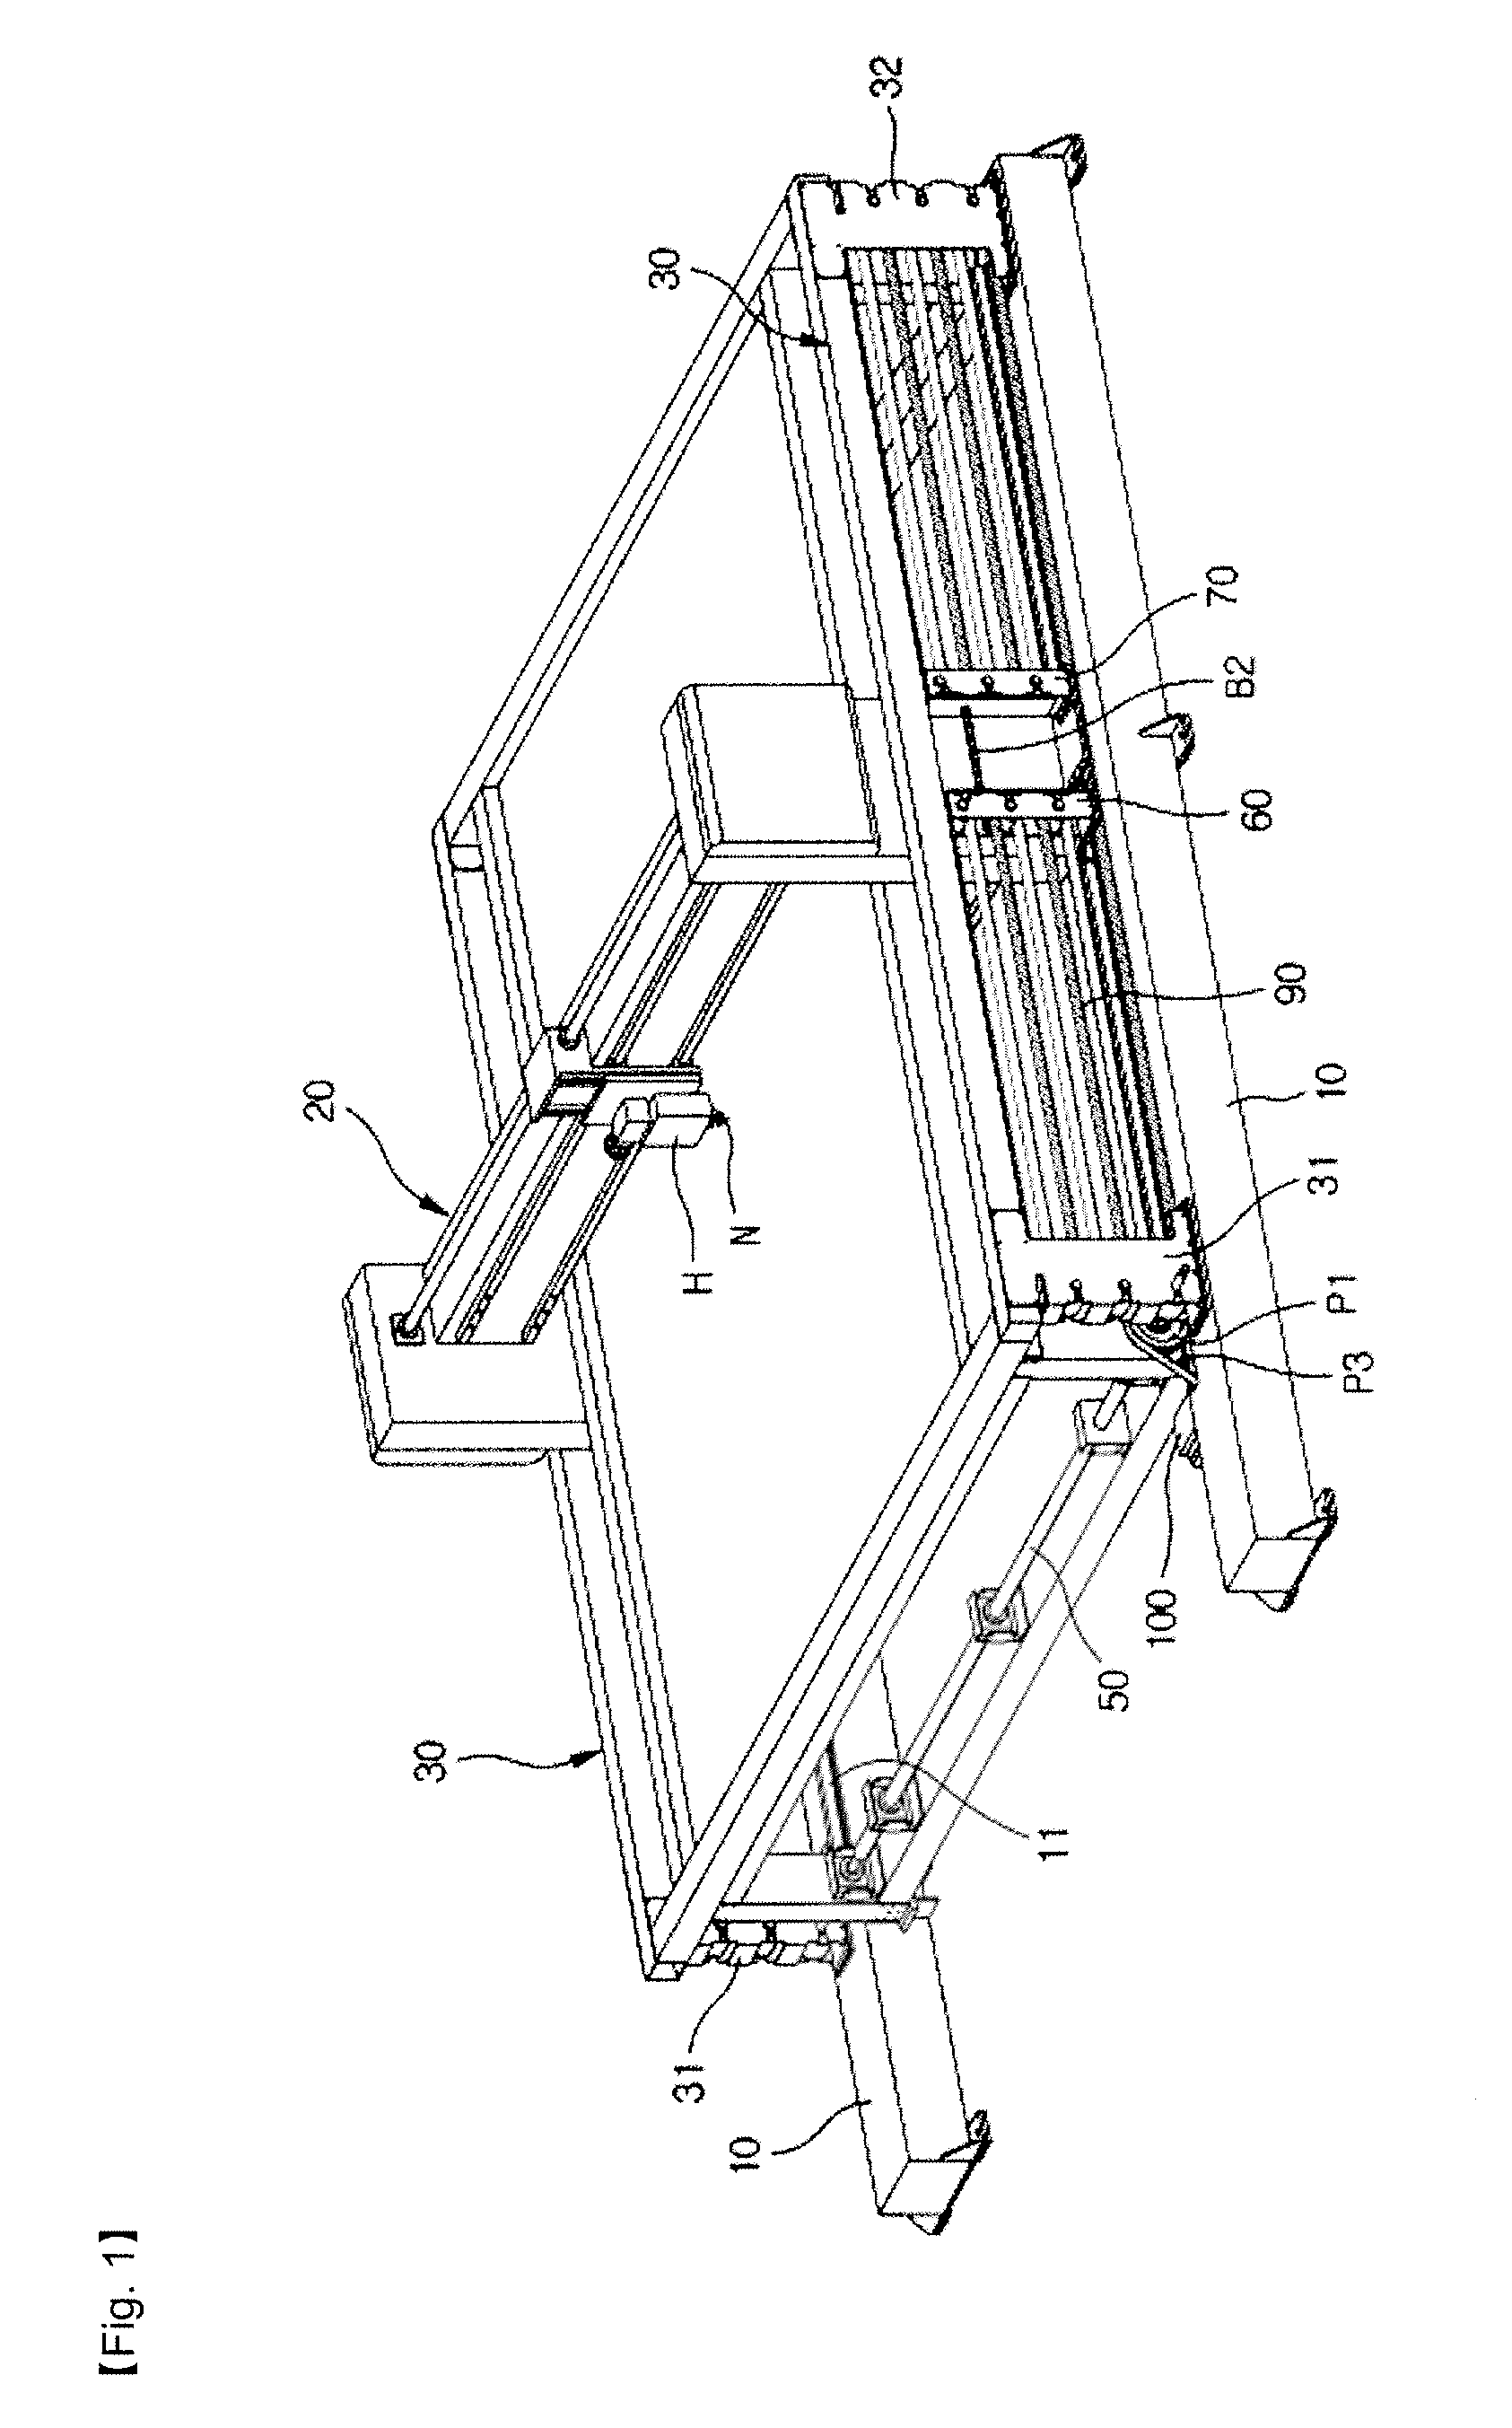 Apparatus for forward and backward movement of sewing machine